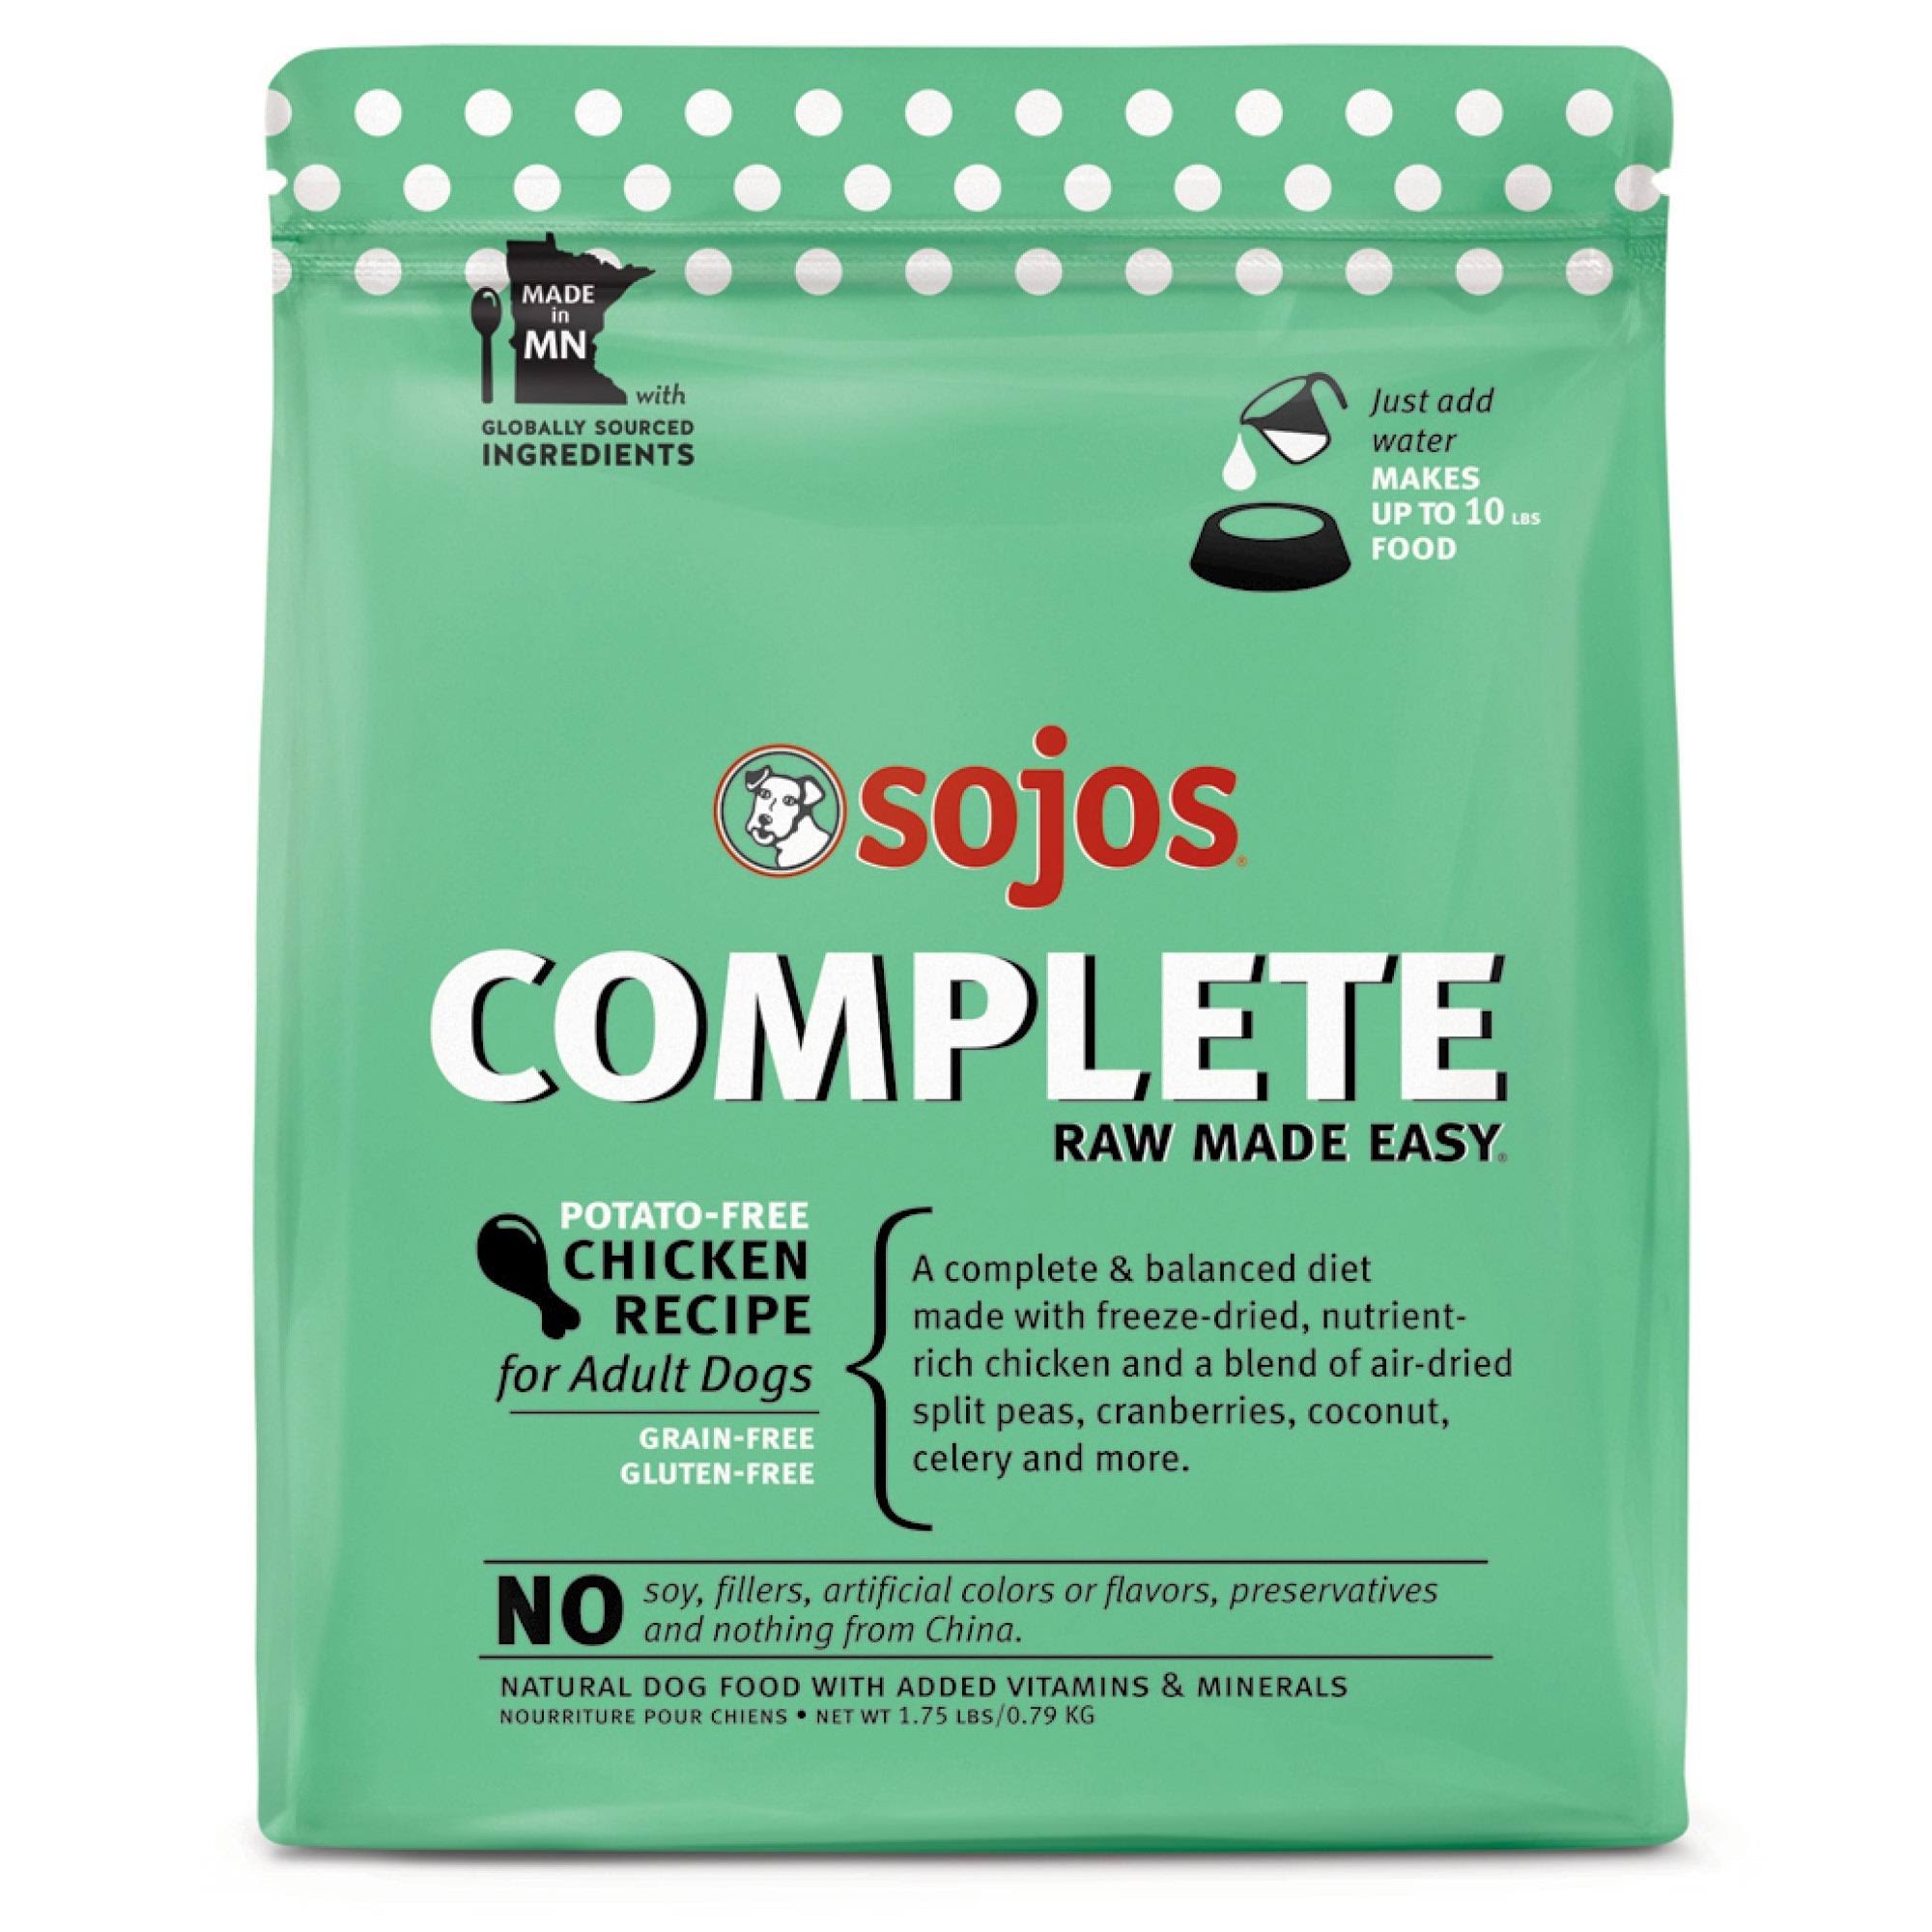 Sojos Complete Adult Grain-Free Chicken Recipe Freeze-Dried Raw Dog Food, 1.75 lbs.